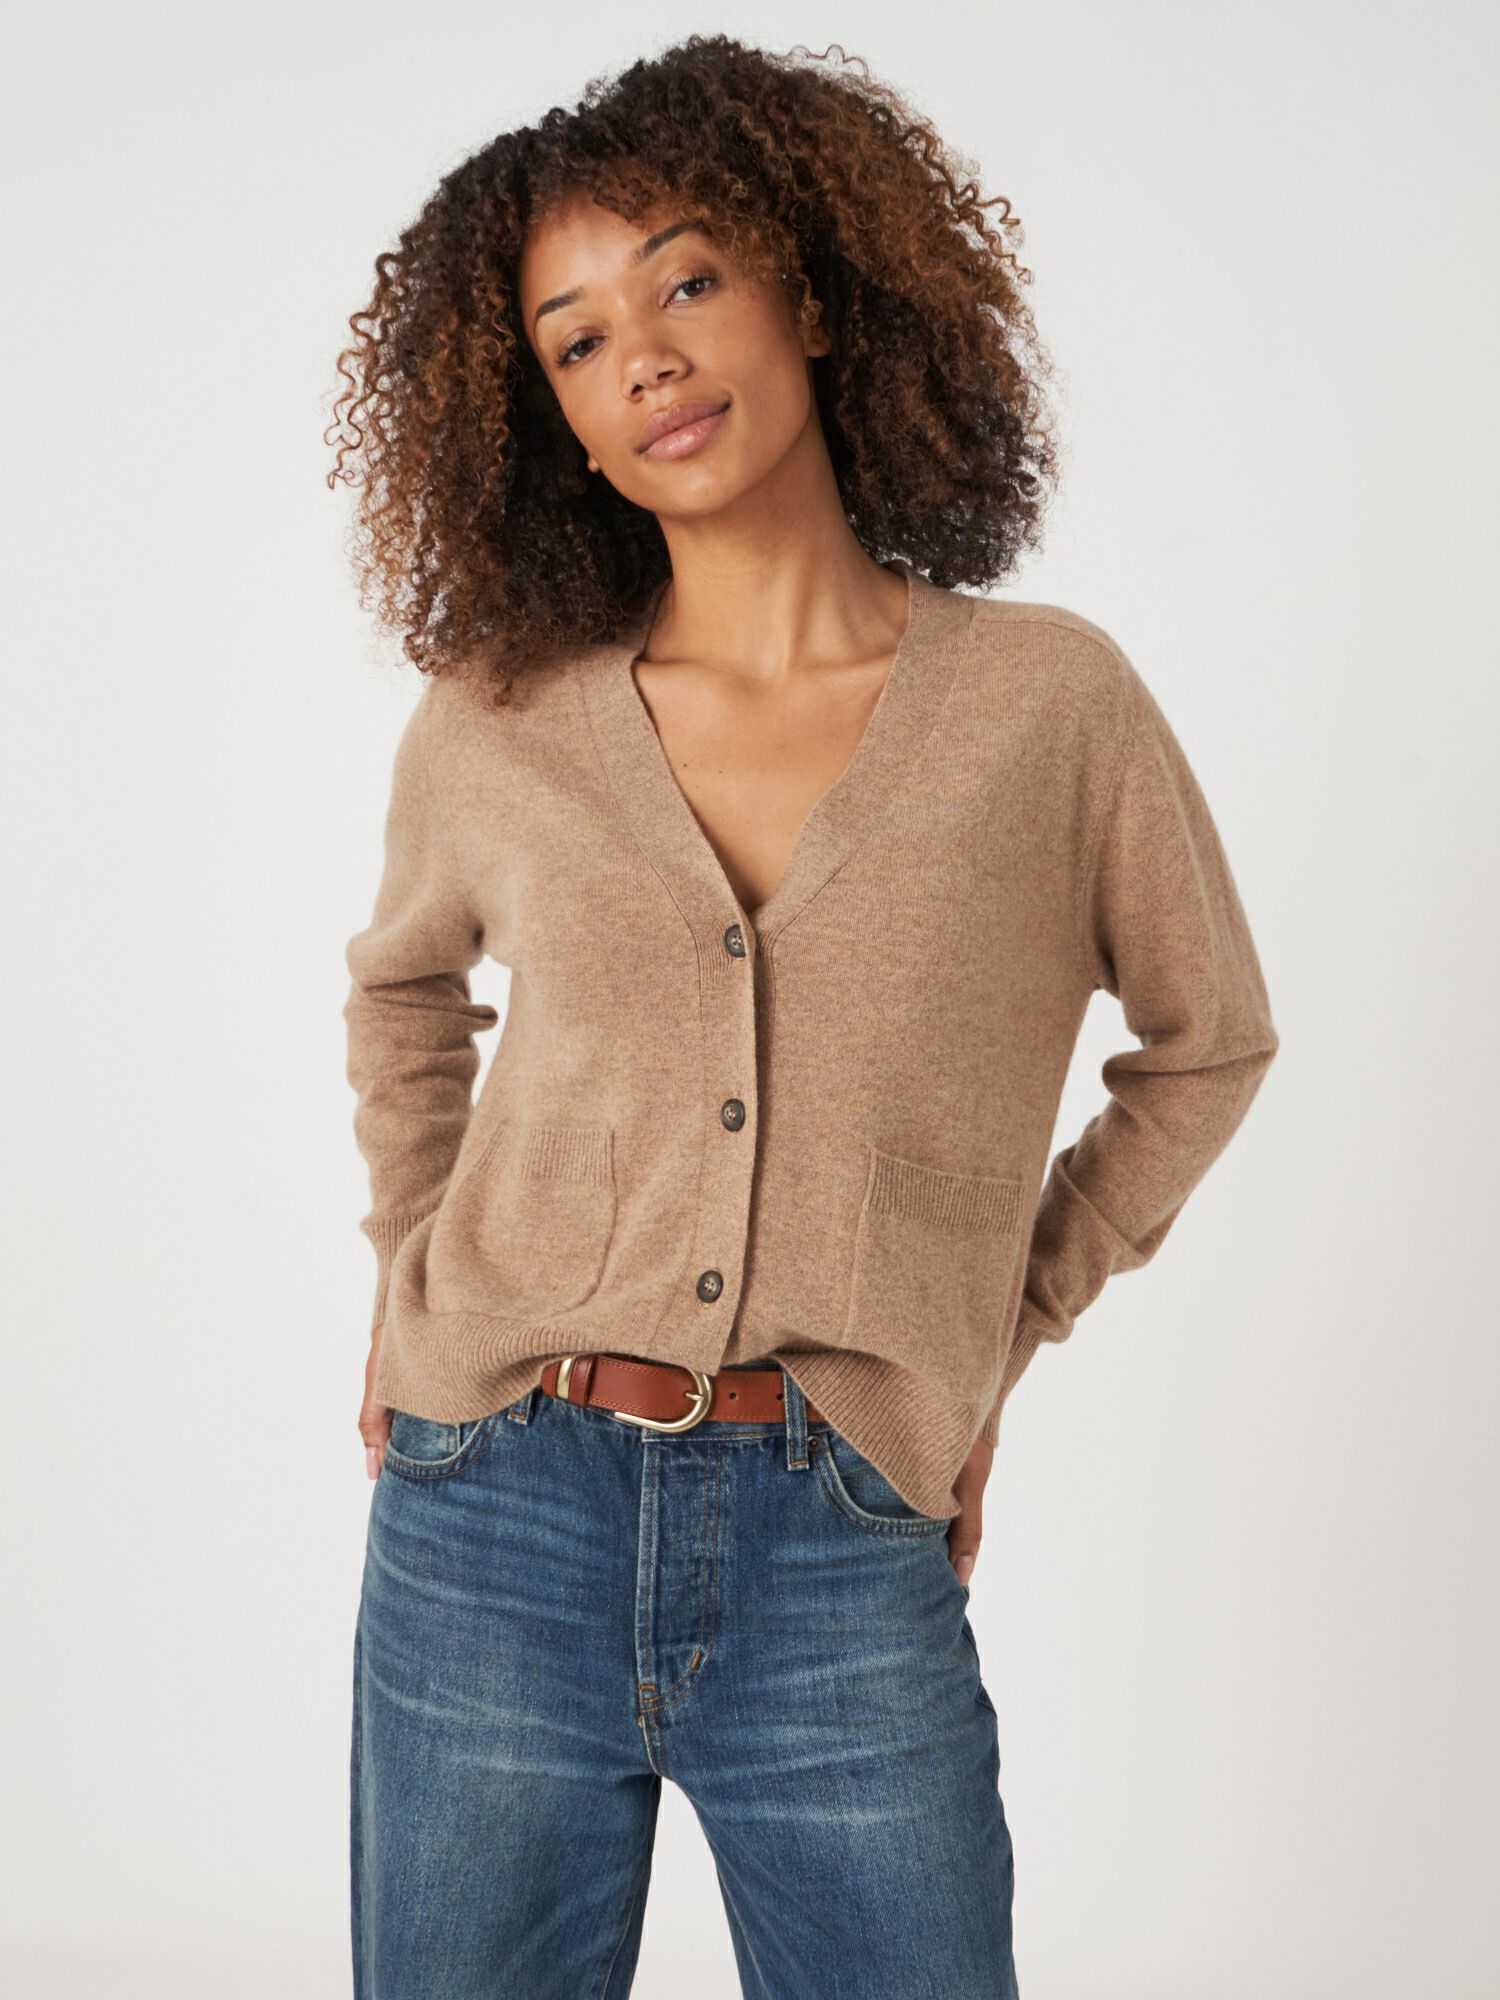 Women's Lightweight soft knit cashmere cardigan with pockets